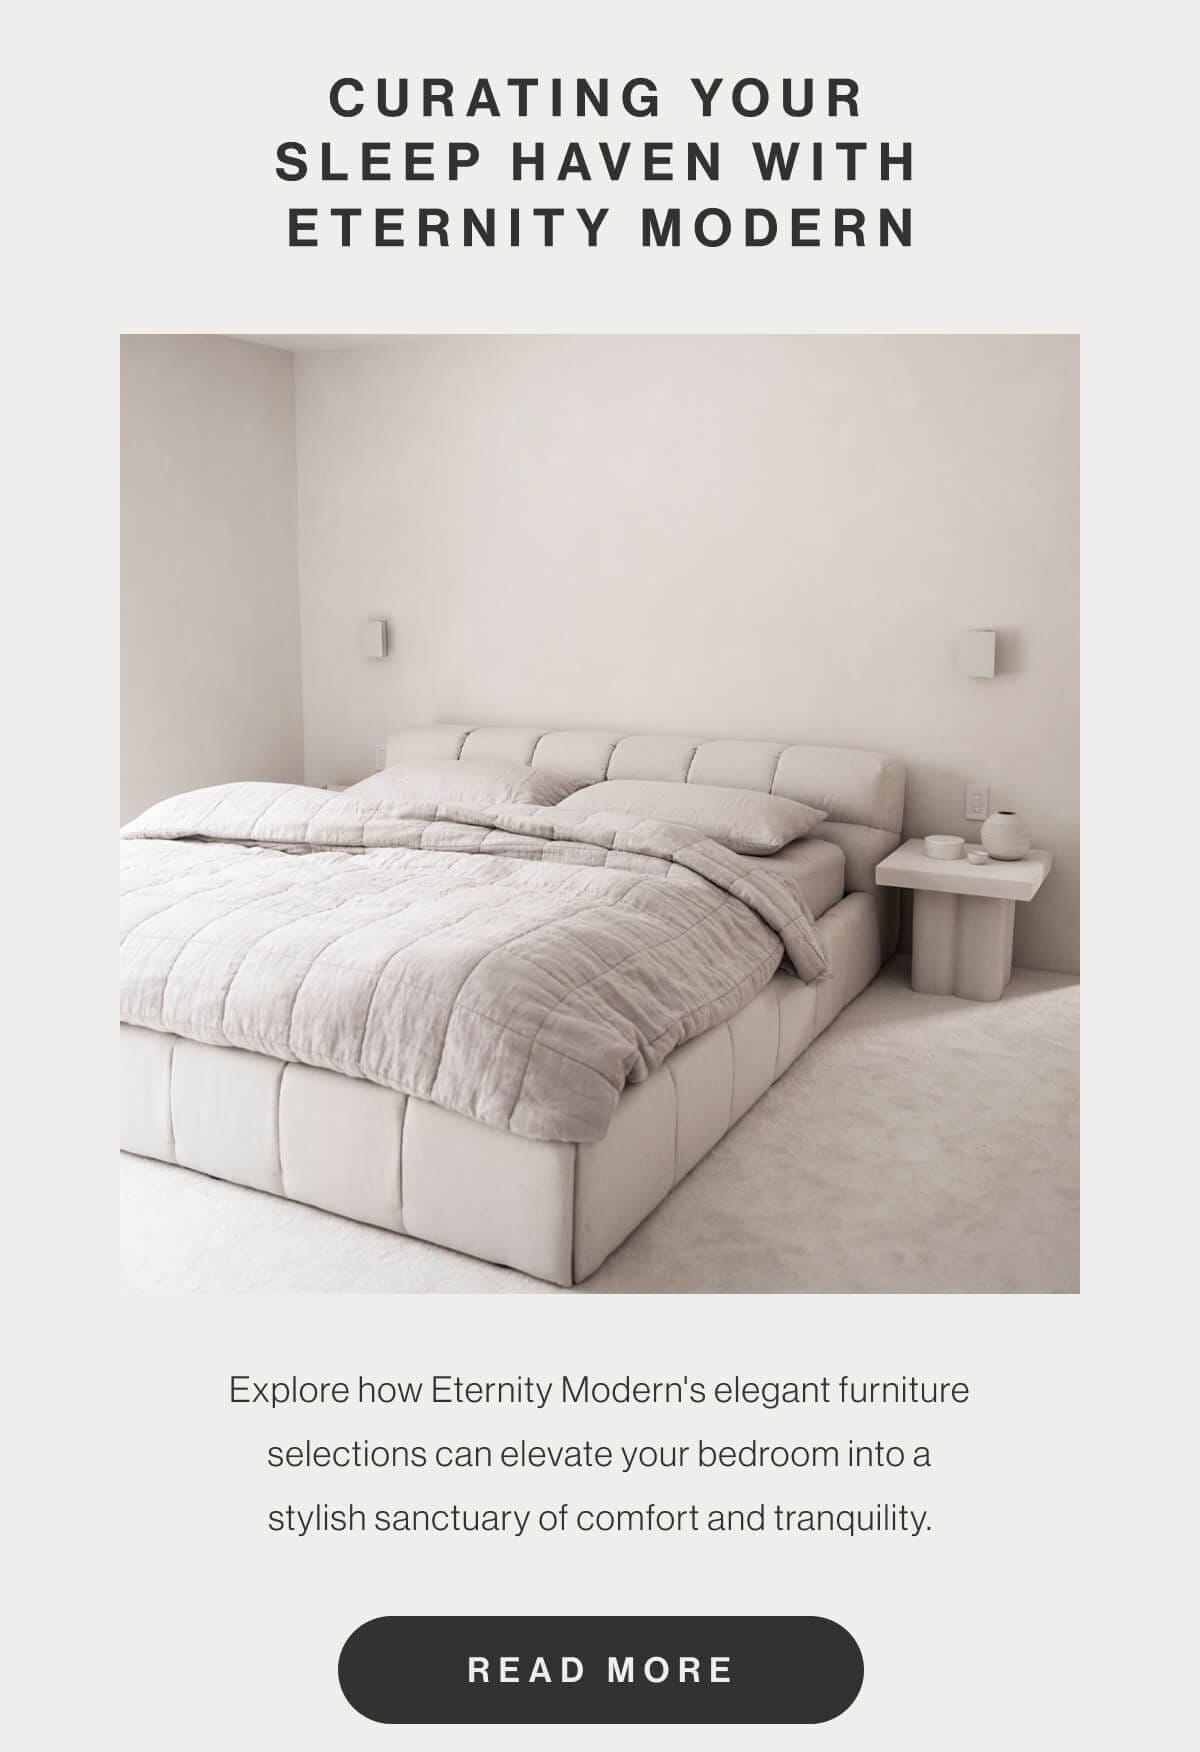 Curating Your Sleep Haven with Eternity Modern - Explore how Eternity Modern's elegant furniture selections can elevate your bedroom into a stylish sanctuary of comfort and tranquility. - Read More